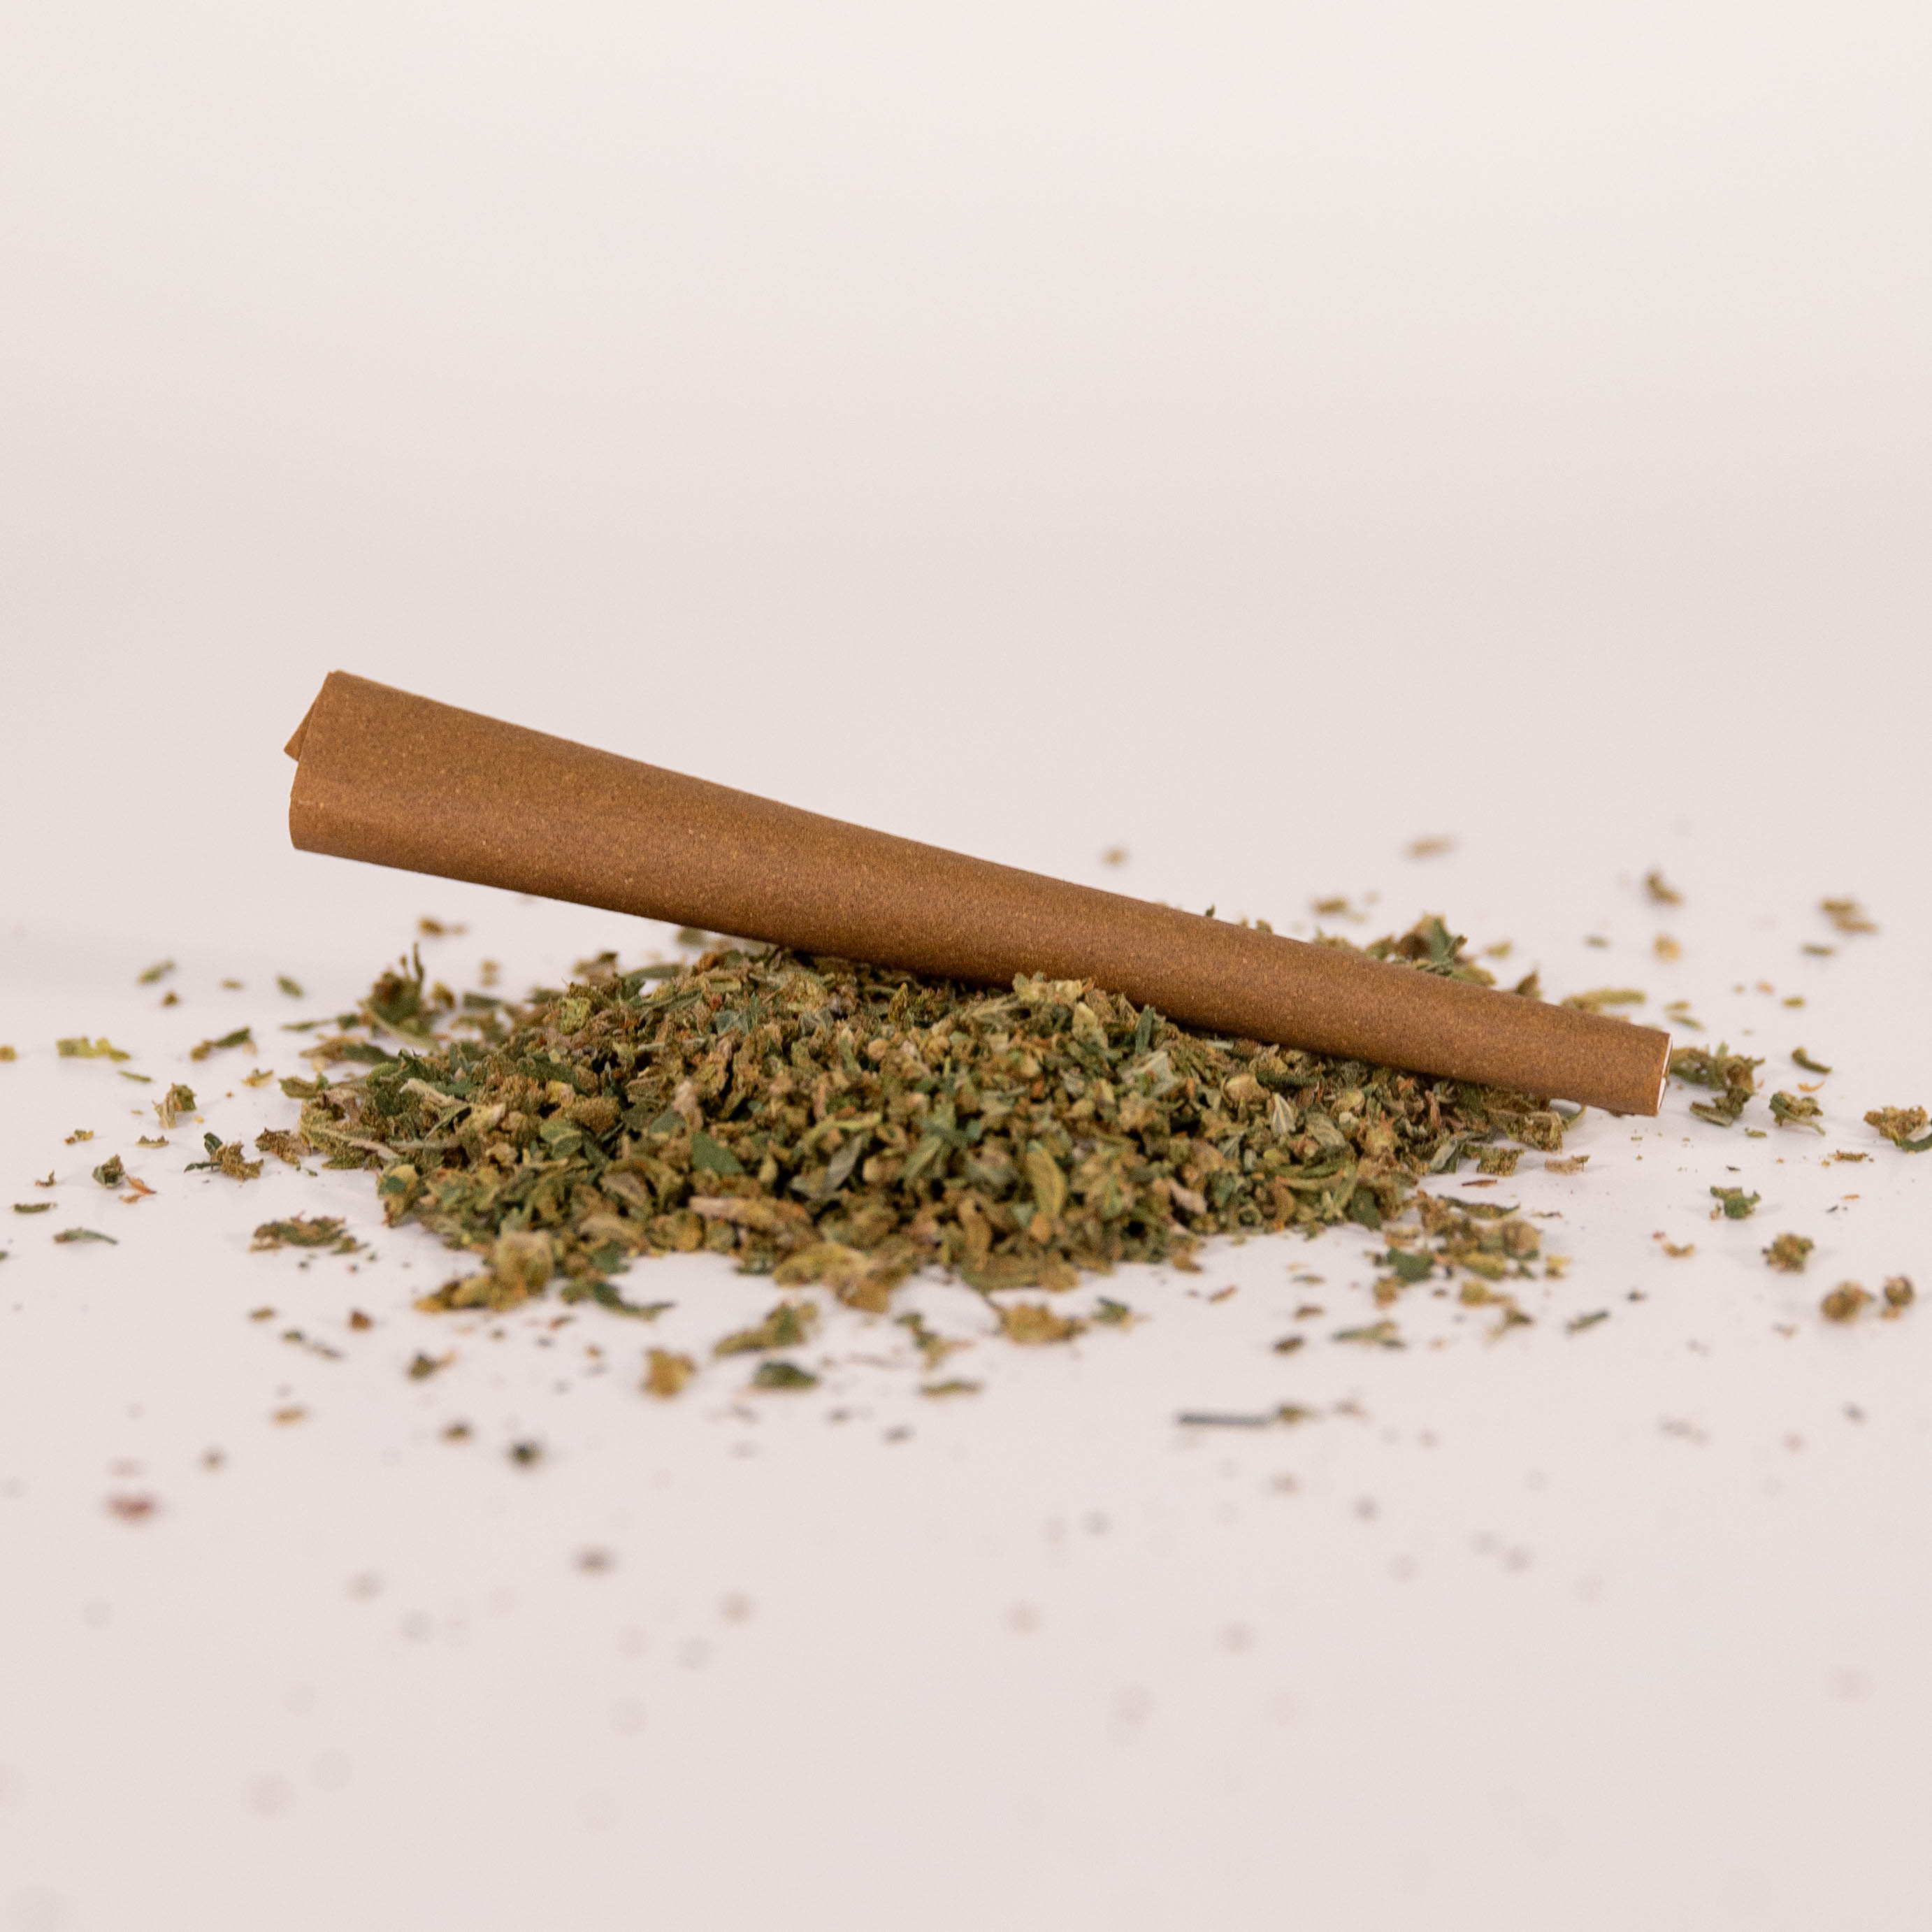 – NEVER Buy Wraps Again! – 100% All Natural Blunt